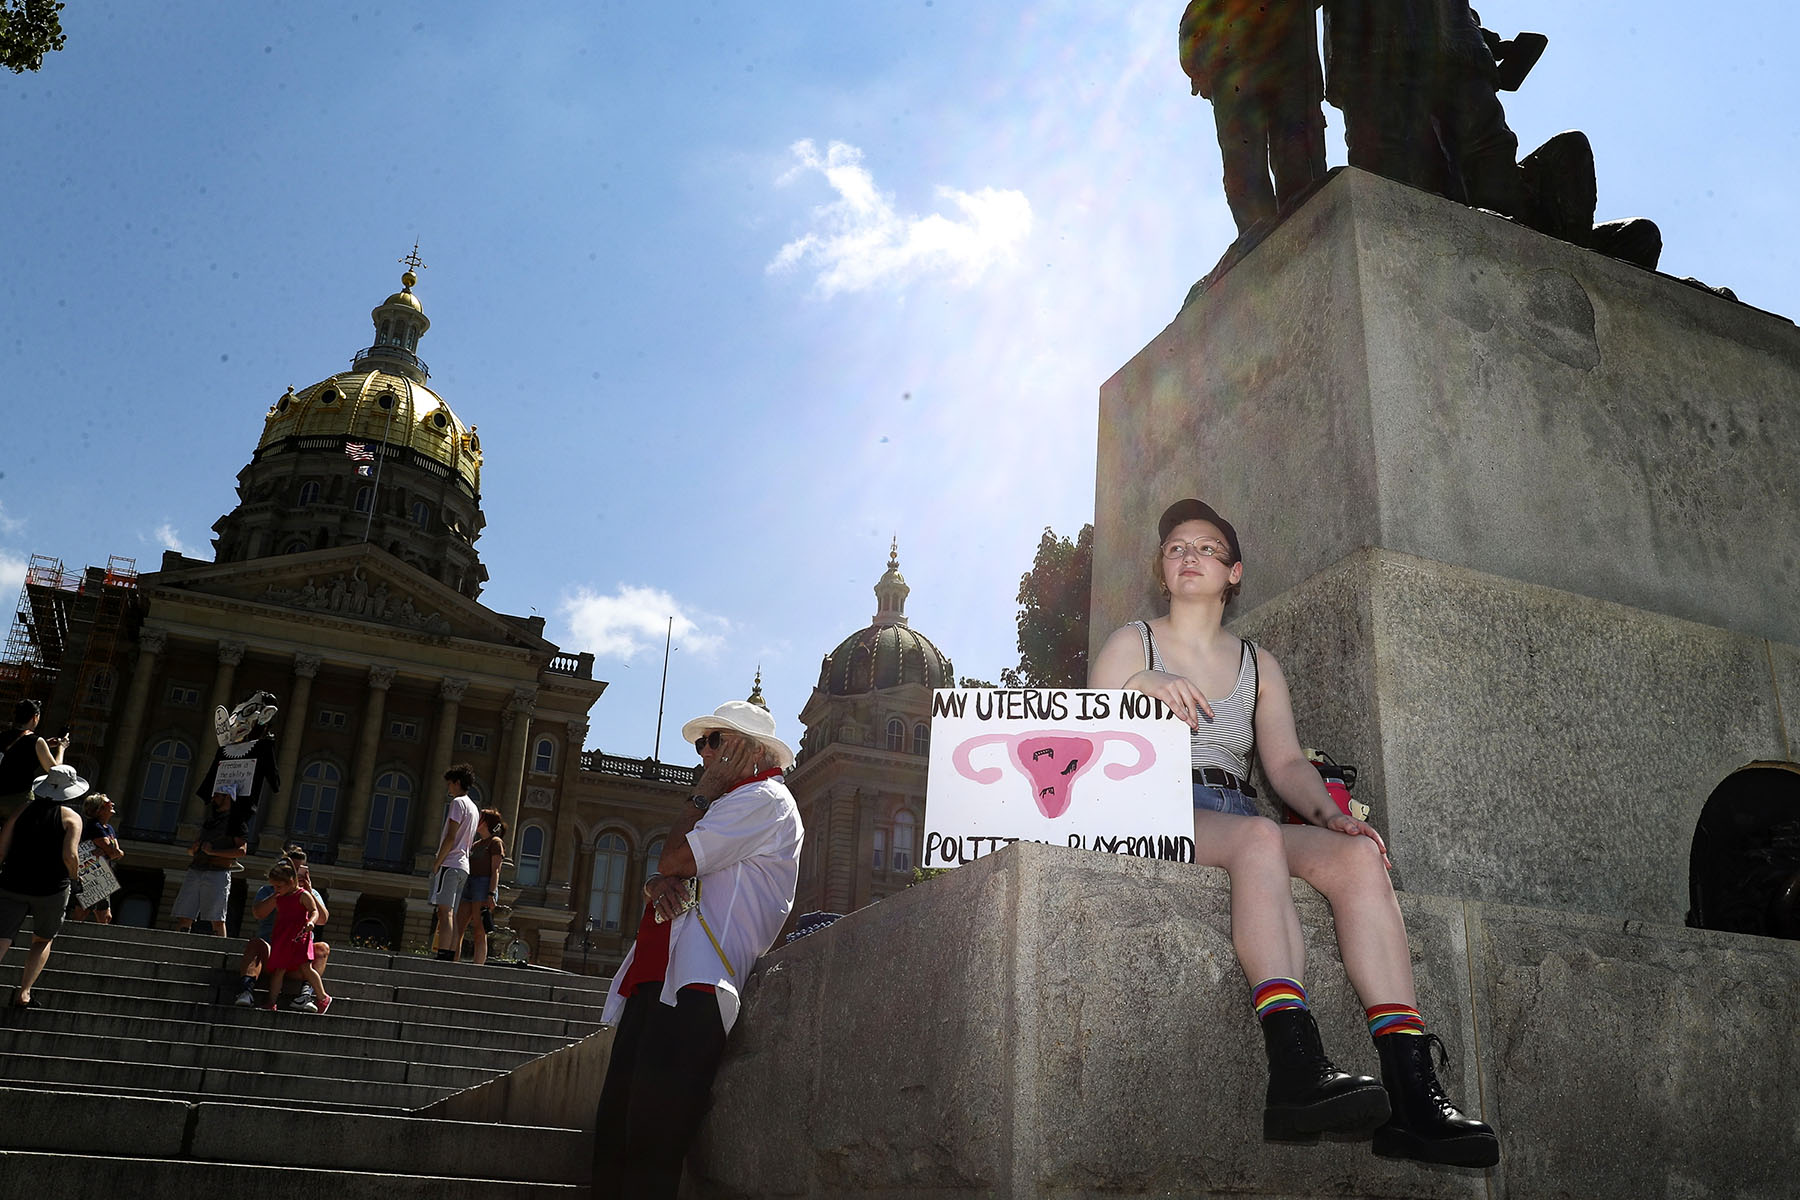 An abortion rights protester waits for the start of a rally for reproductive freedom on at the Iowa State Capitol Building. They hold a sign that reads "My uterus is not your political playground."